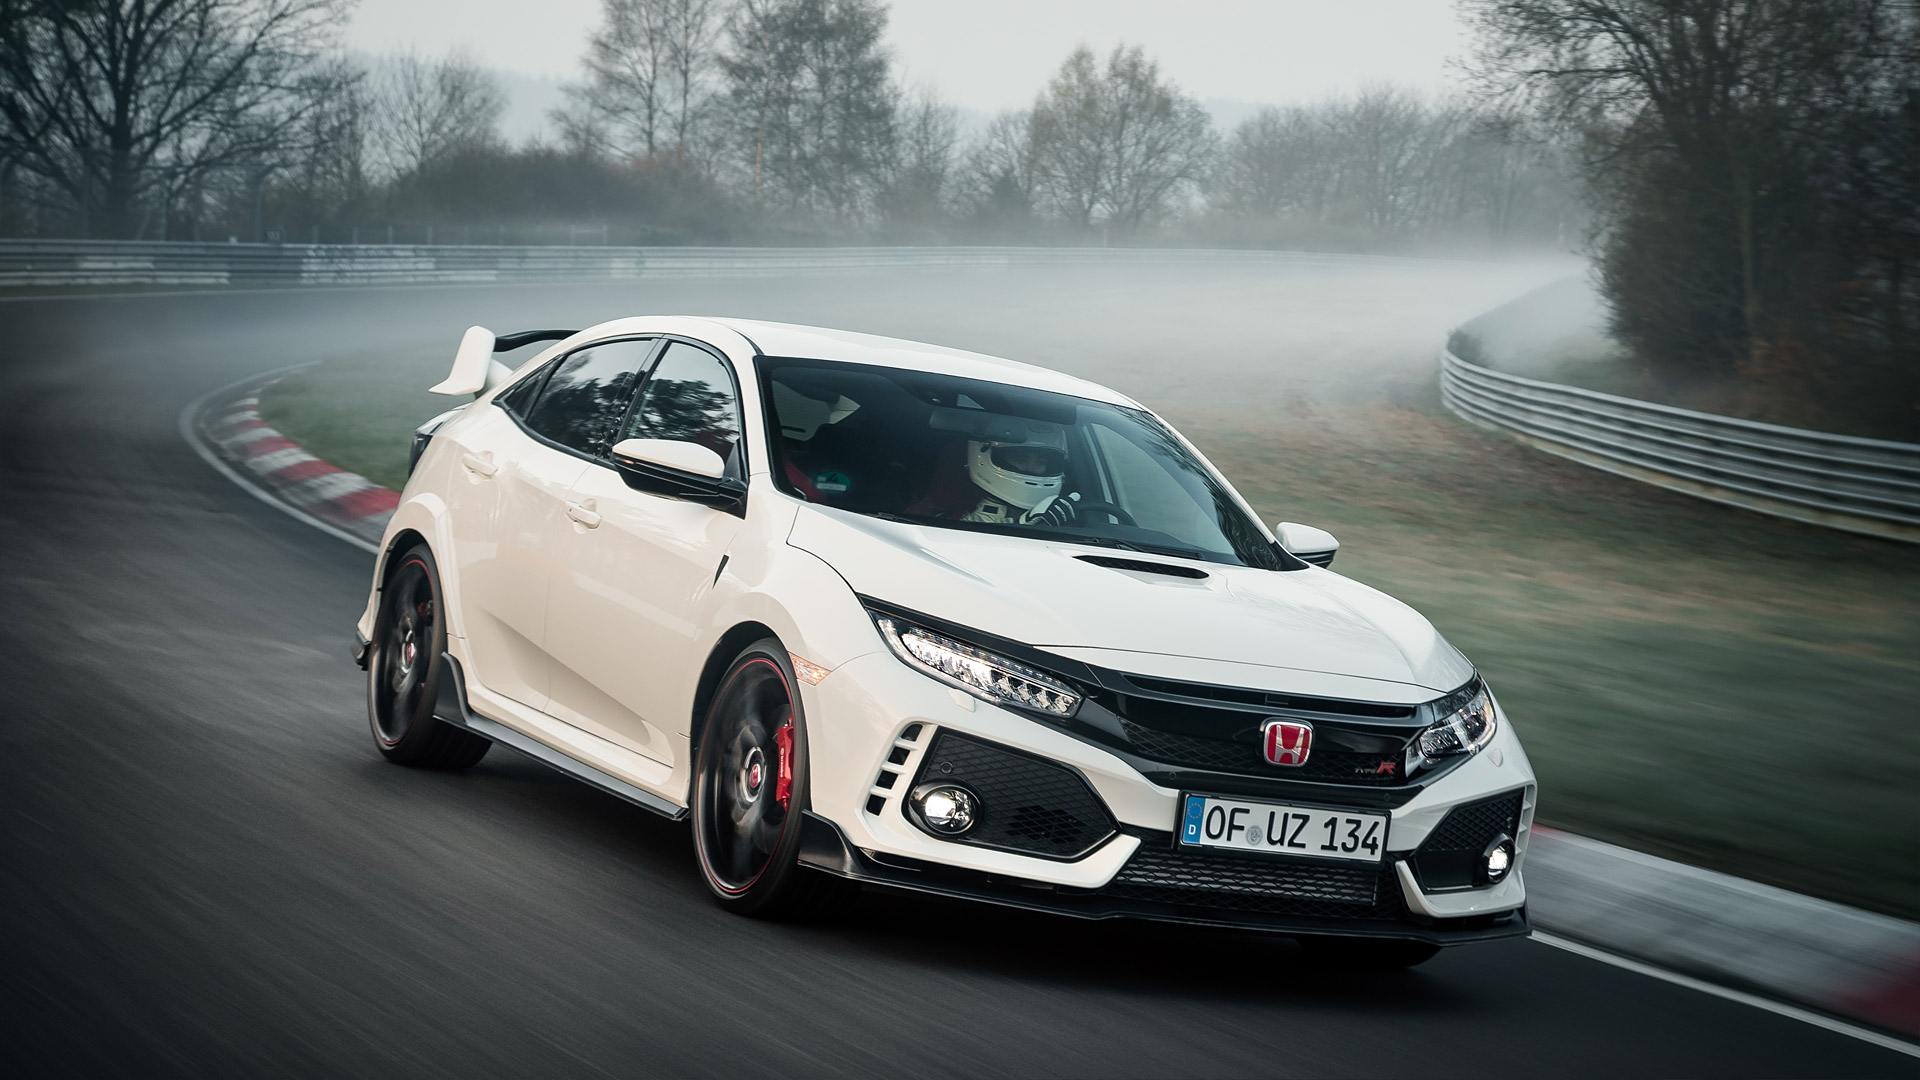 2018 Honda Civic Type R Wallpapers HD Images   WSupercars 1920x1080